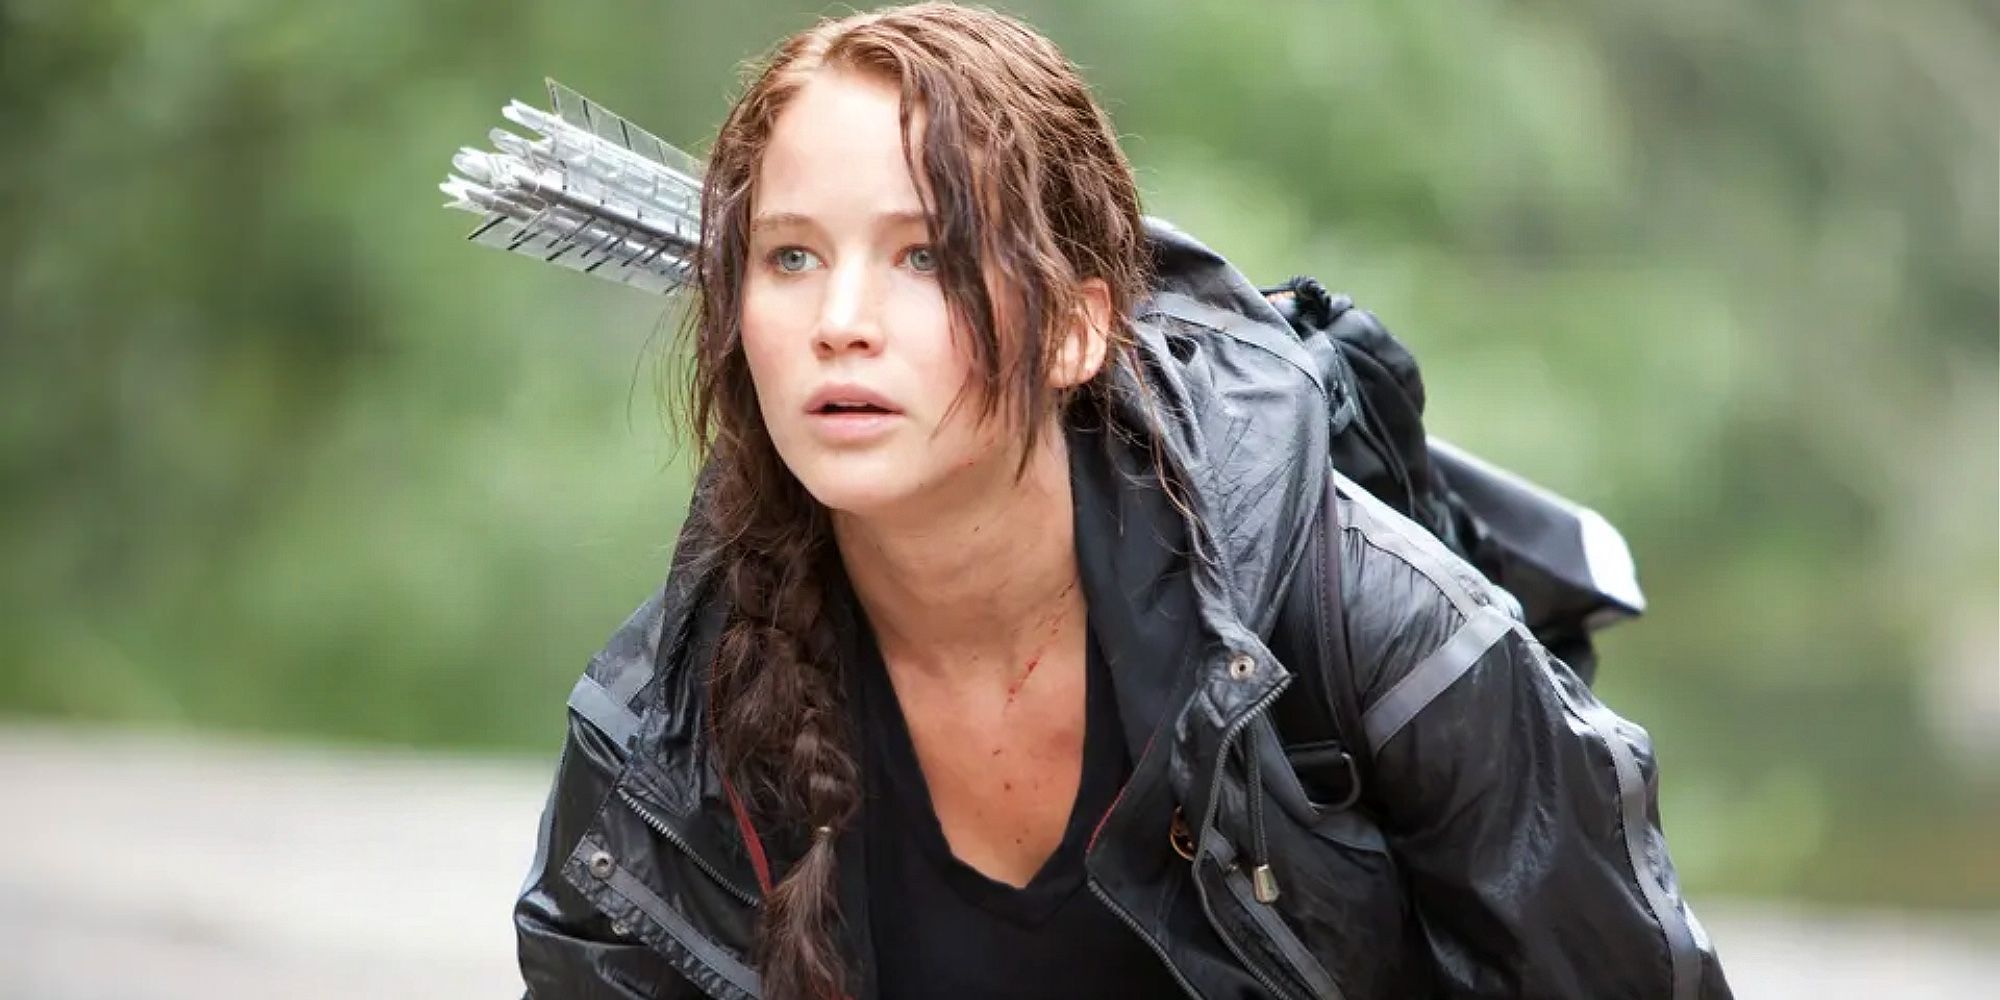 Katniss is kneeling on the ground, with arrows on her back in The Hunger Games.